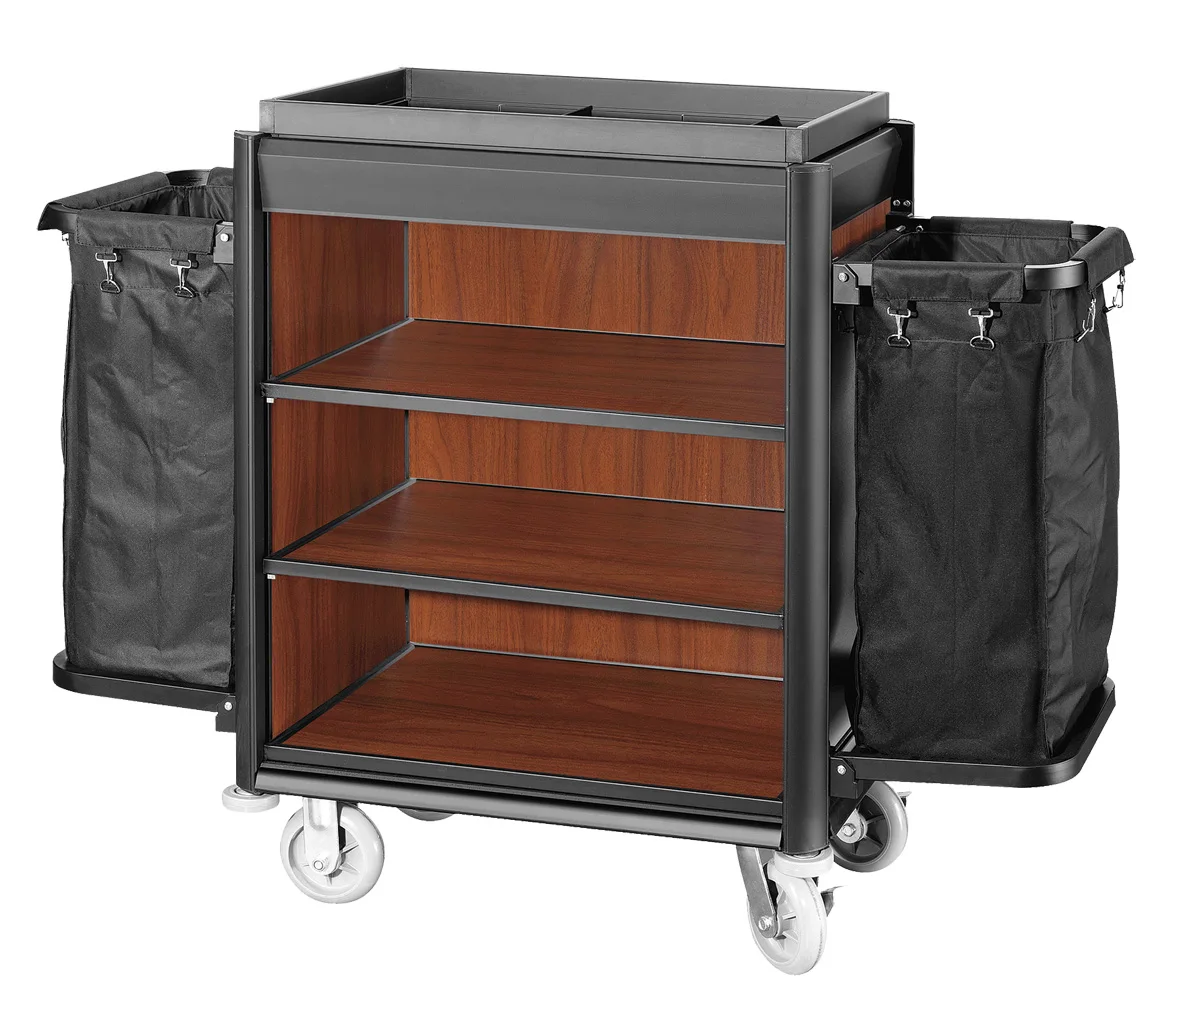 Hotel Room Attendant Cart Housekeeping Room Service Trolley from China  manufacturer - LAICOZY hotel supply